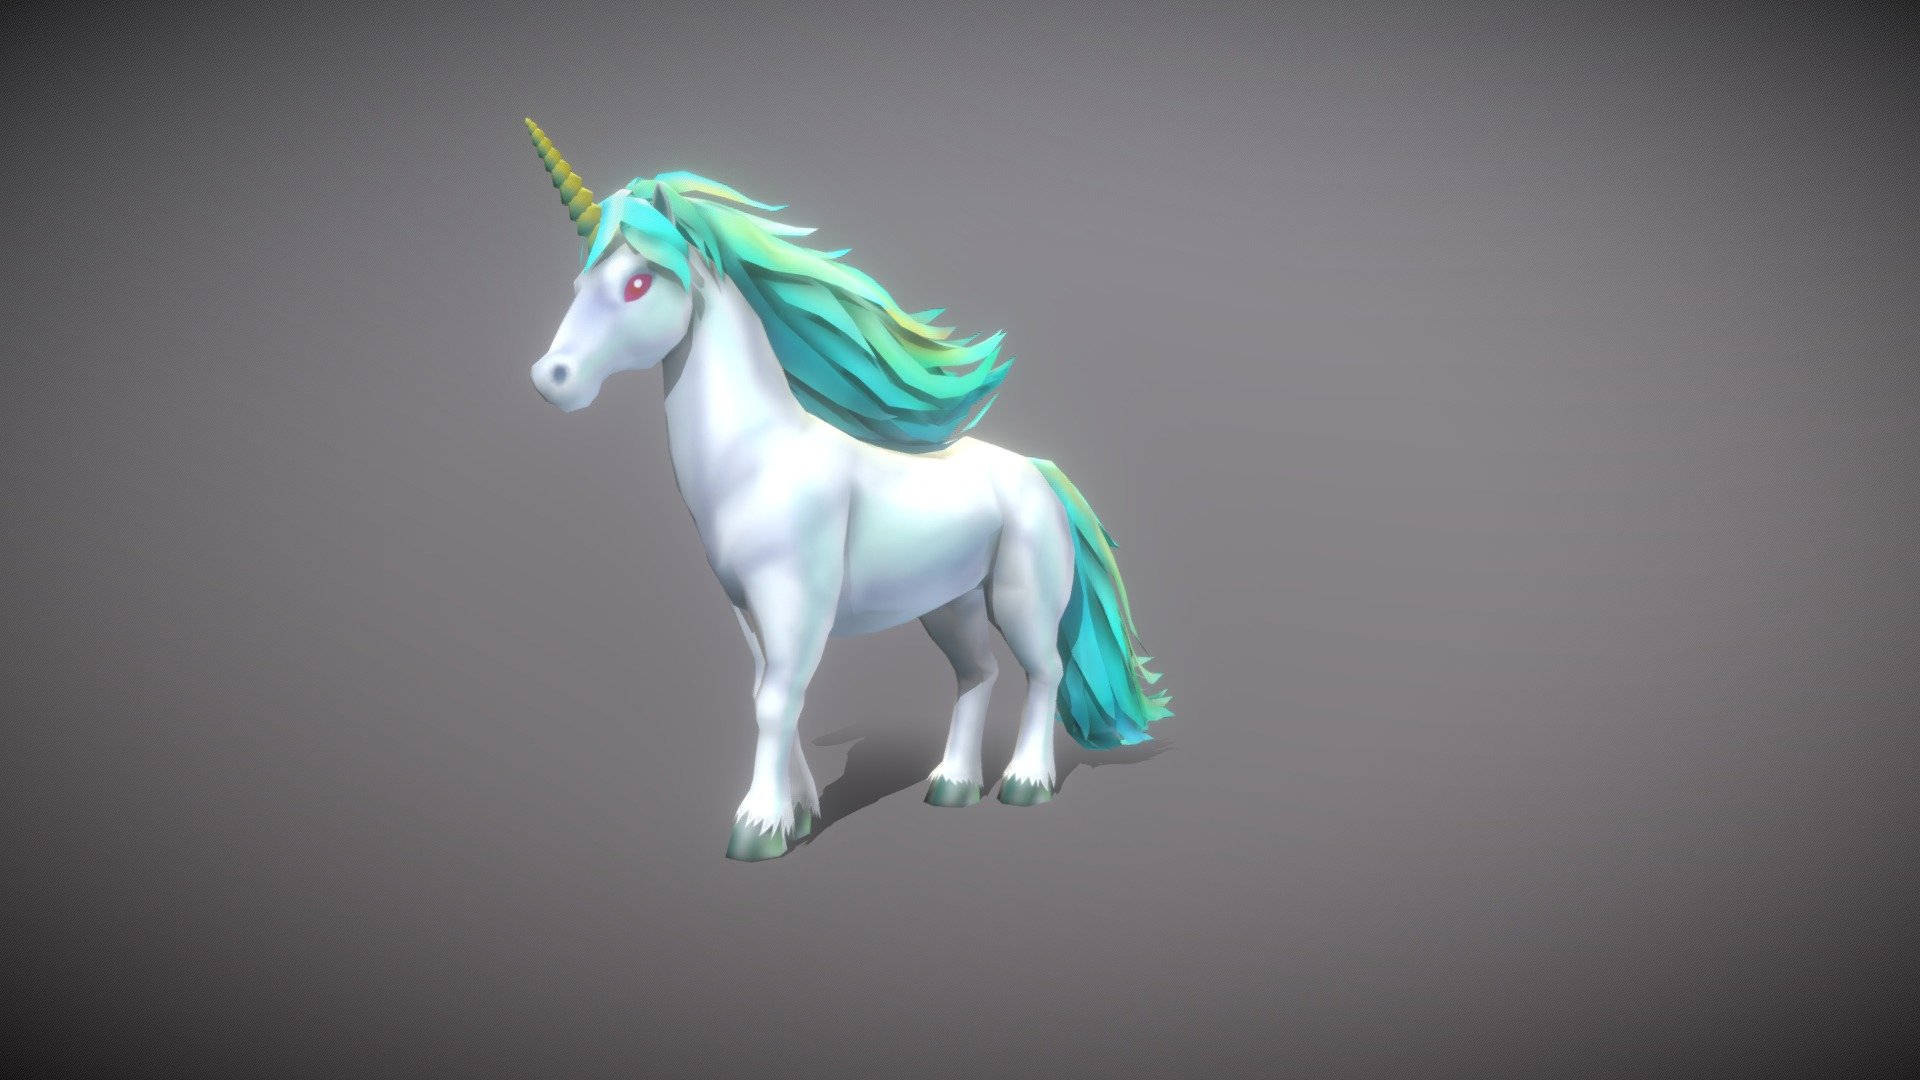 Stylized Unicorn 3D Model:
- Lowpoly (Tris: 3146 - Verts: 2064)
- Game ready with Unity Package, optimized for VR/AR apps
- Texture Maps includes: Basecolor
- Model is created in Maya, other files supported includes: Blender, FBX, Glb/Gltf, Unity

7 animations:
- 20-50: idle
- 60-70: run
- 80-104: walk
- 115-140: attack
- 150-160: getHit
- 170-210: die
- 220-250: roar - Lowpoly Stylized Unicorn Rigged and Animated - Buy Royalty Free 3D model by Dzung Dinh (@hugechimera) 3d model